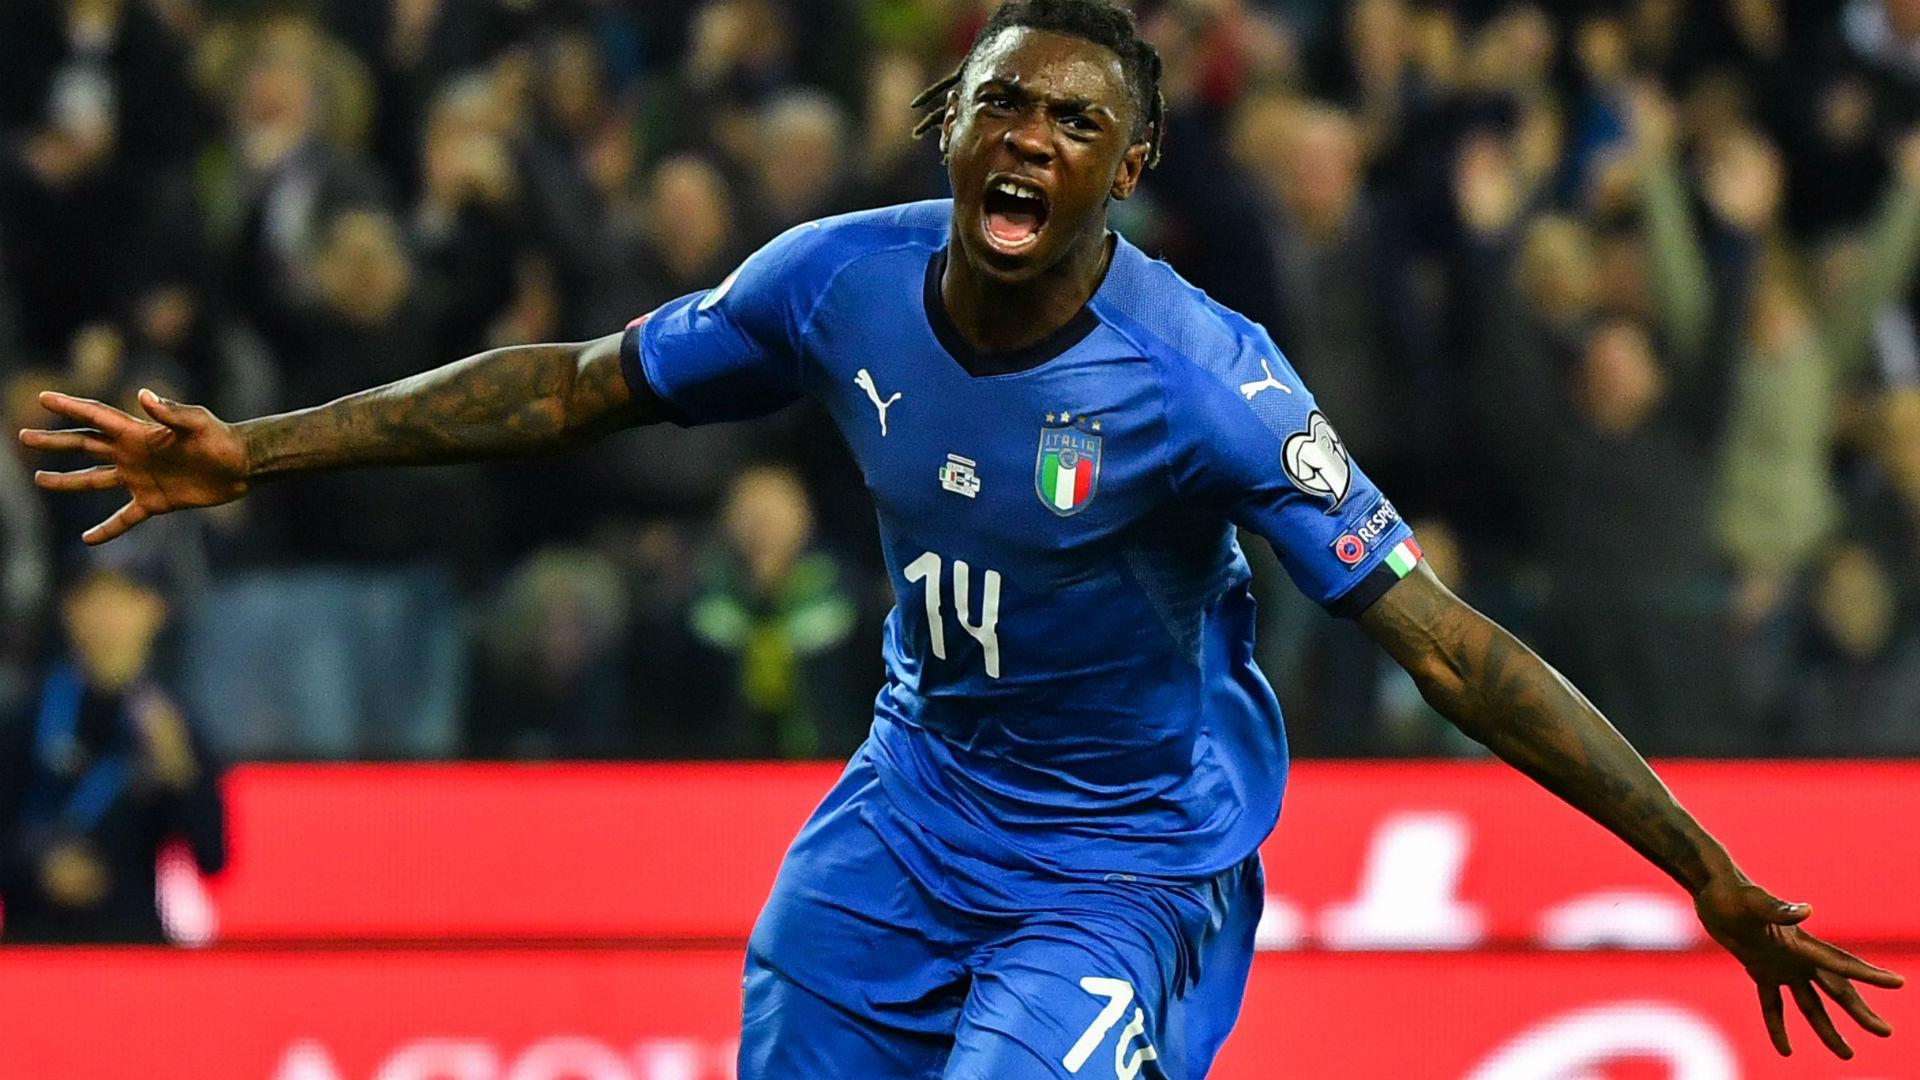 Juventus news: Moise Kean becomes second youngest goalscorer